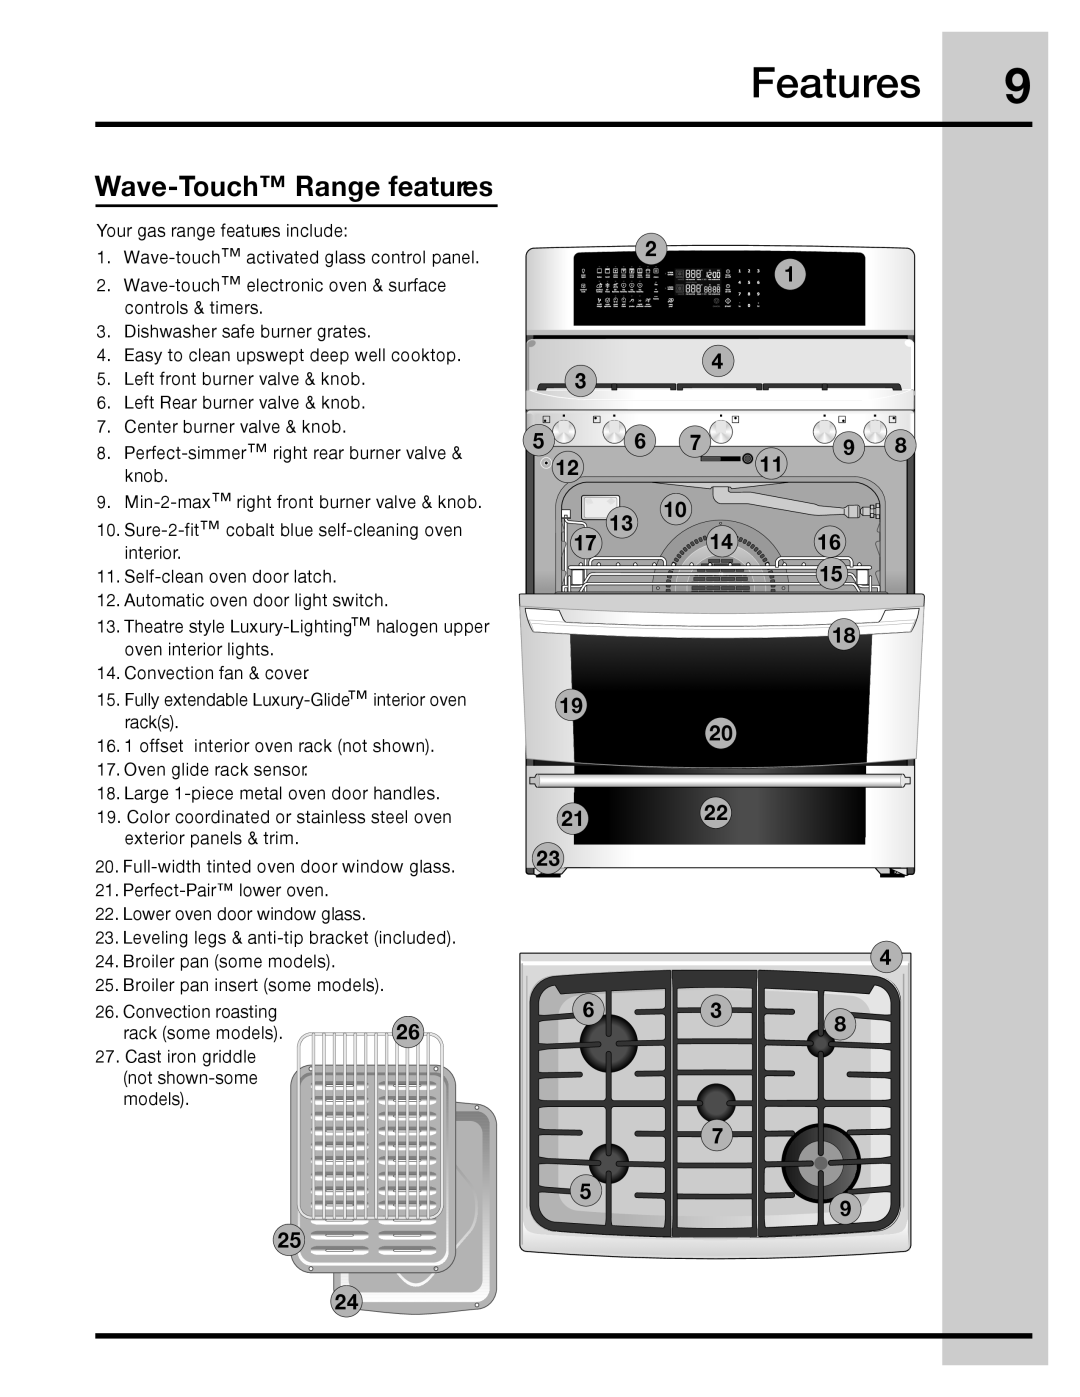 Electrolux 316471110 manual Wave-Touch Range features, 2122, Features 